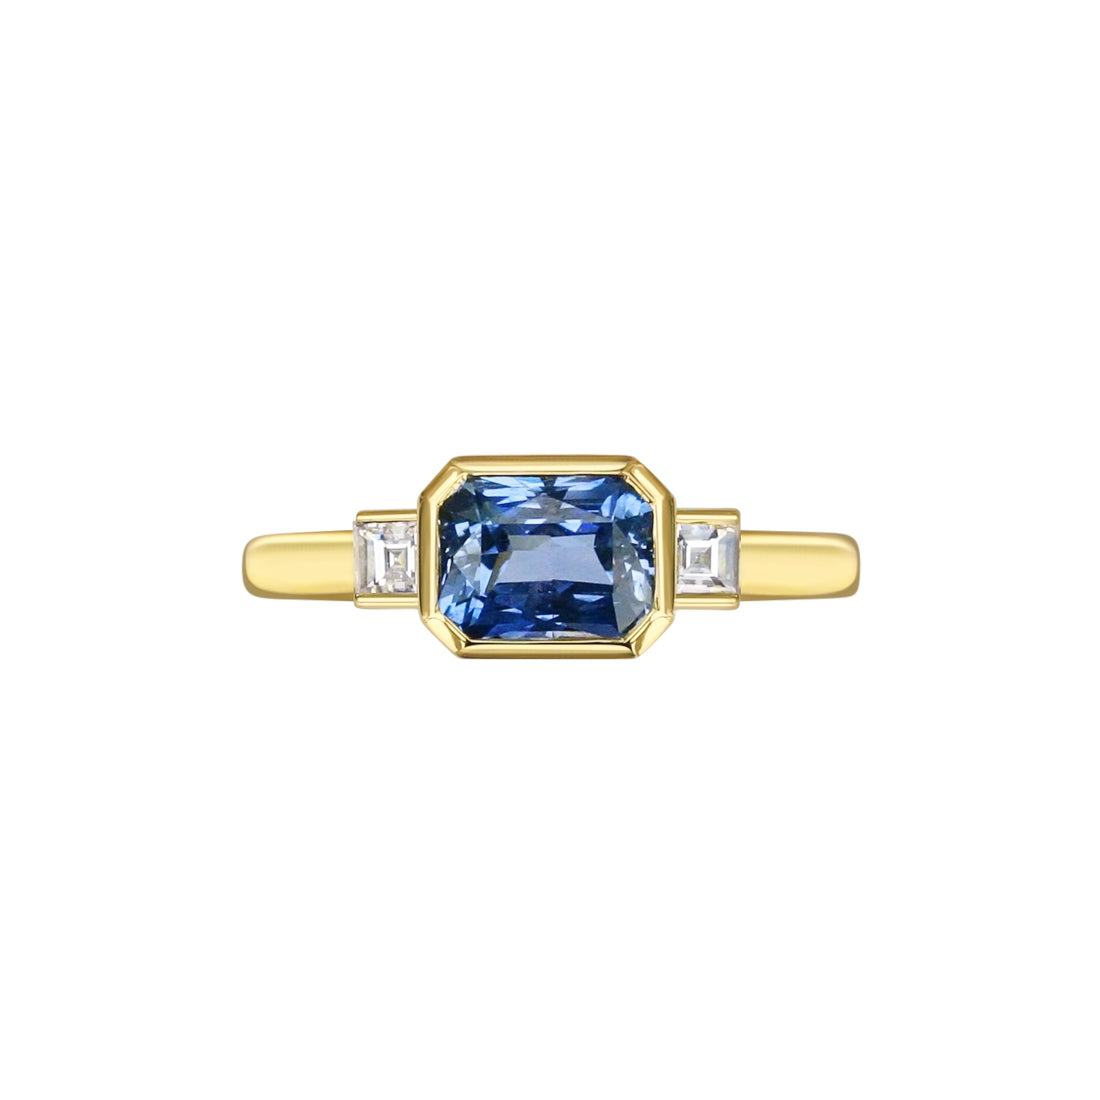  East-to-West set Blue Sapphire Ring by Gee Woods | The Cut London